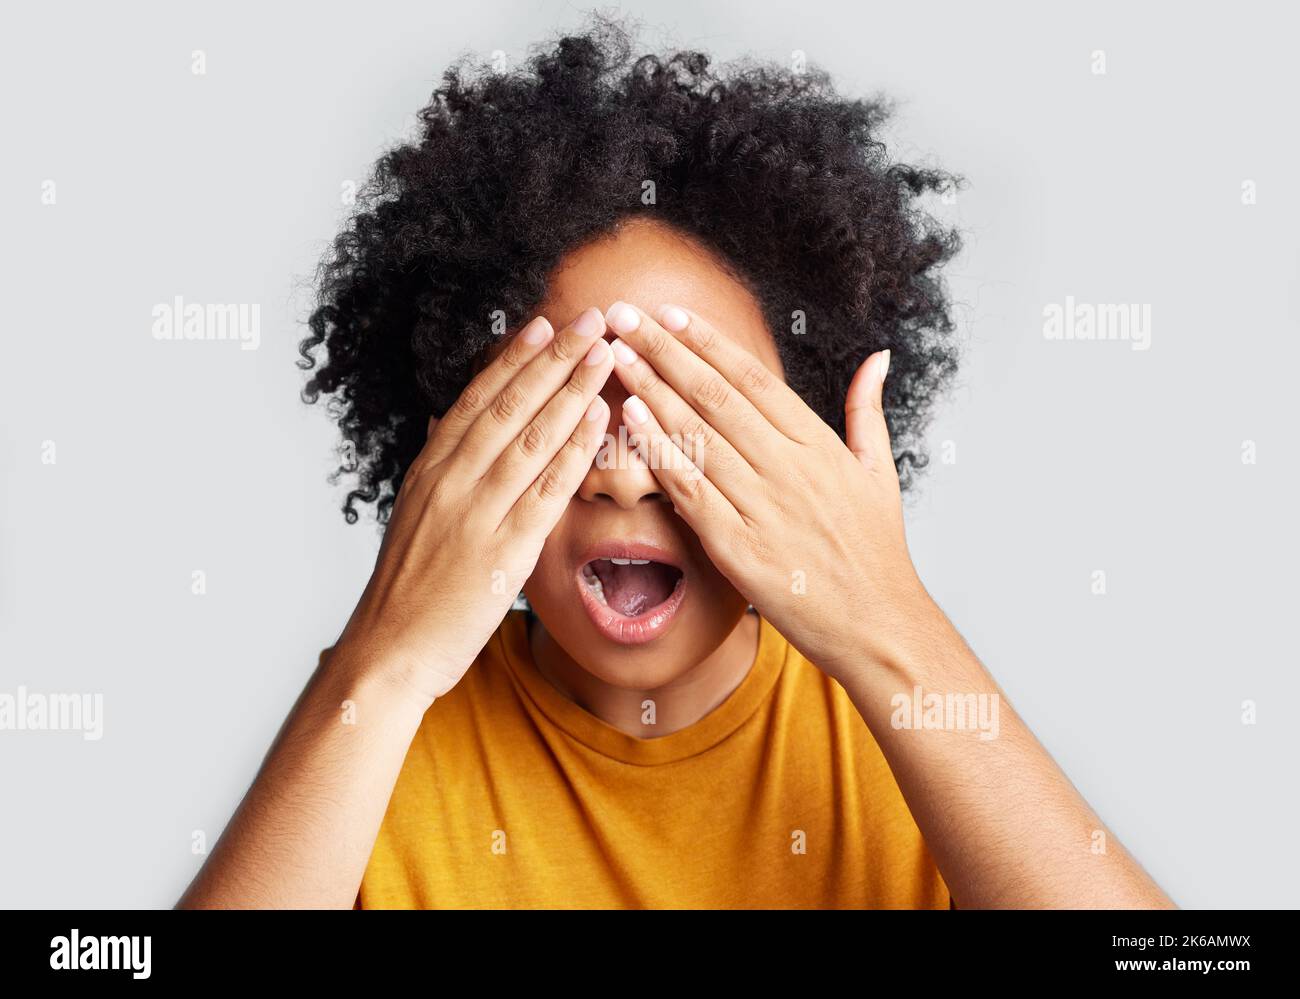 I want to peek so badly. a young woman covering her eyes while posing against a grey background. Stock Photo